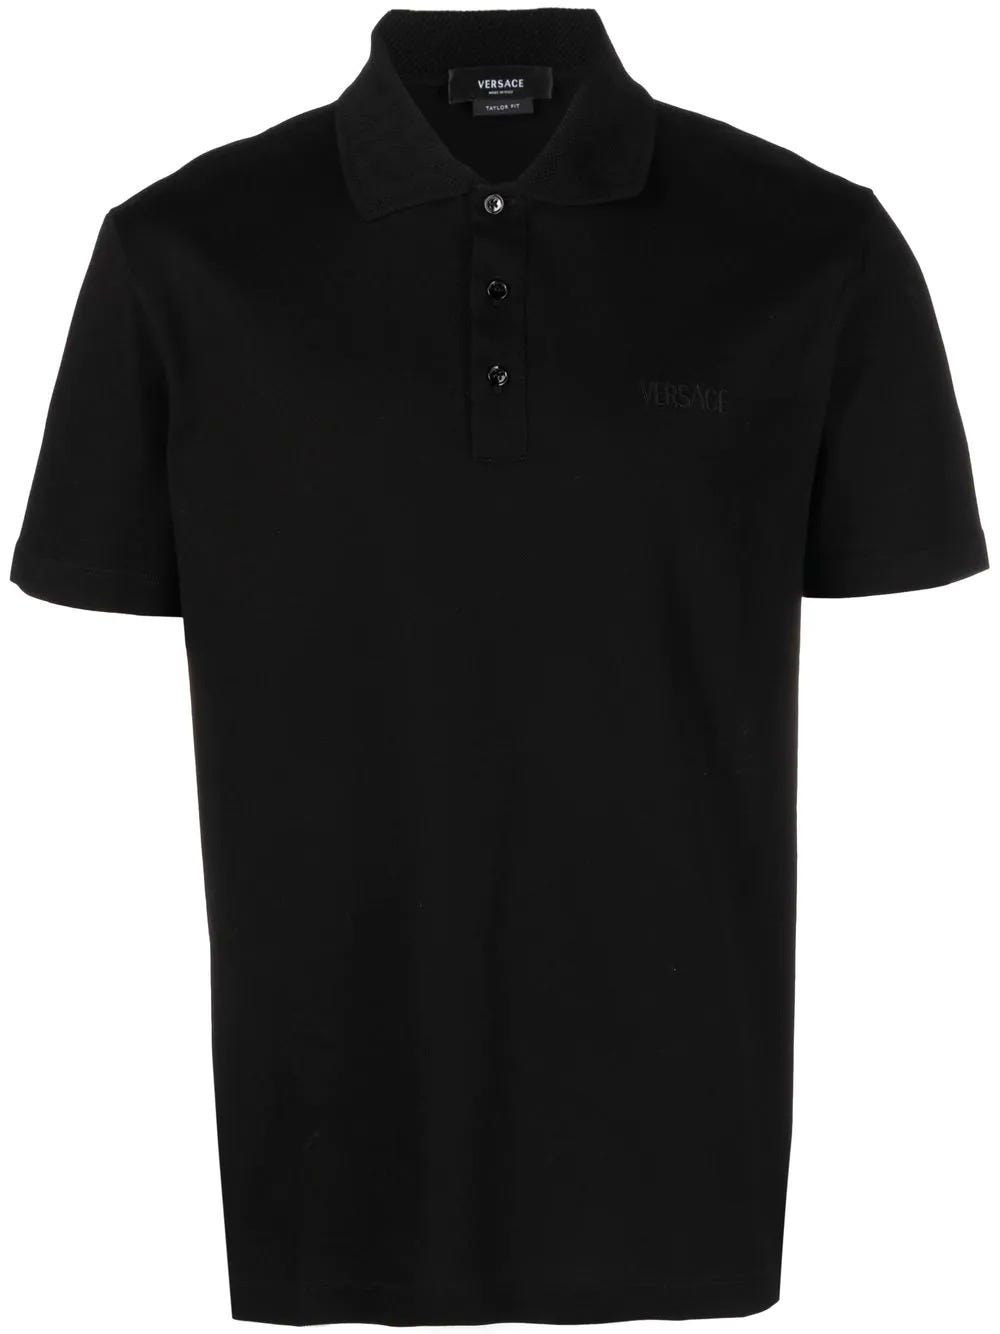 VERSACE BLACK POLO SHIRT WITH LOGO EMBROIDERY